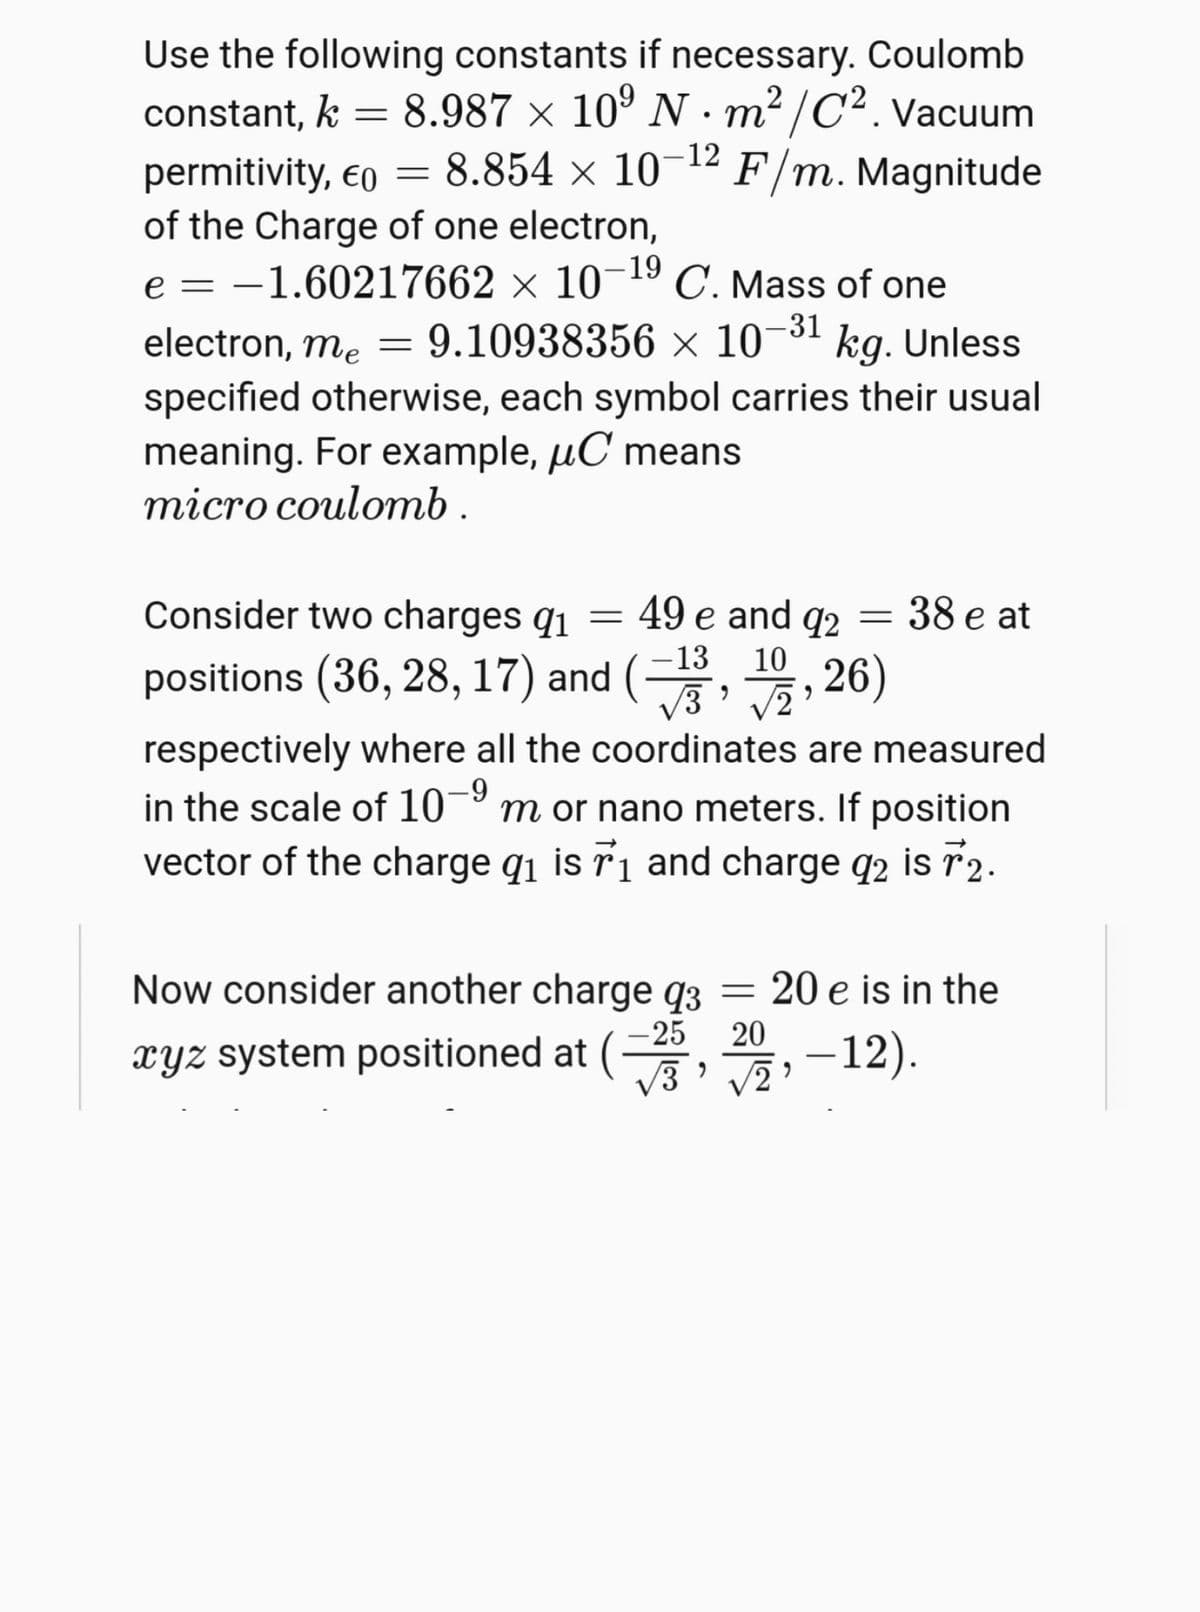 Use the following constants if necessary. Coulomb
constant, k = 8.987 × 10º N · m² /C².Vacuum
8.854 × 10-12 F/m. Magnitude
permitivity, eo
of the Charge of one electron,
e = -1.60217662 × 10¬19 C. Mass of one
electron, me
9.10938356 × 10-31 kg. Unless
specified otherwise, each symbol carries their usual
meaning. For example, µC means
тіcro coulomb.
Consider two charges q1
49 e and q2 = 38 e at
positions (36, 28, 17) and (, , 26)
respectively where all the coordinates are measured
in the scale of 10¬° m or nano meters. If position
vector of the charge qi is 71 and charge q2 is r2.
Now consider another charge q3
20 e is in the
20
xYz system positioned at (=25
–12).
